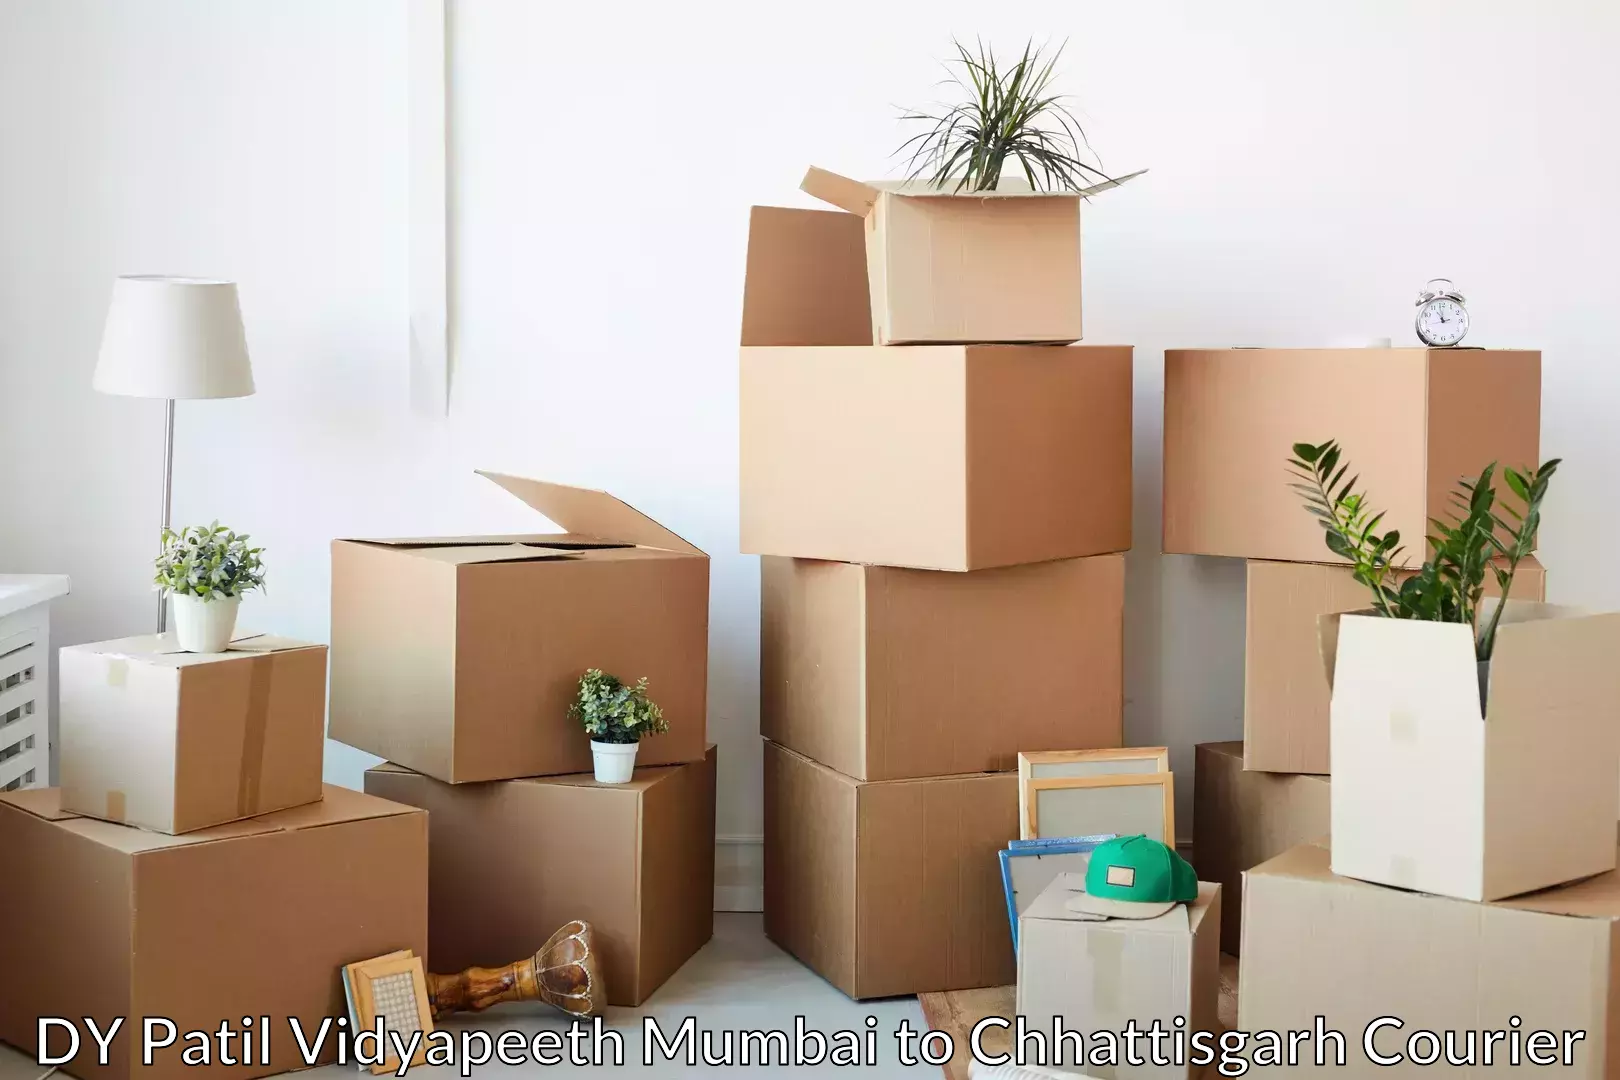 Affordable relocation services in DY Patil Vidyapeeth Mumbai to Raipur